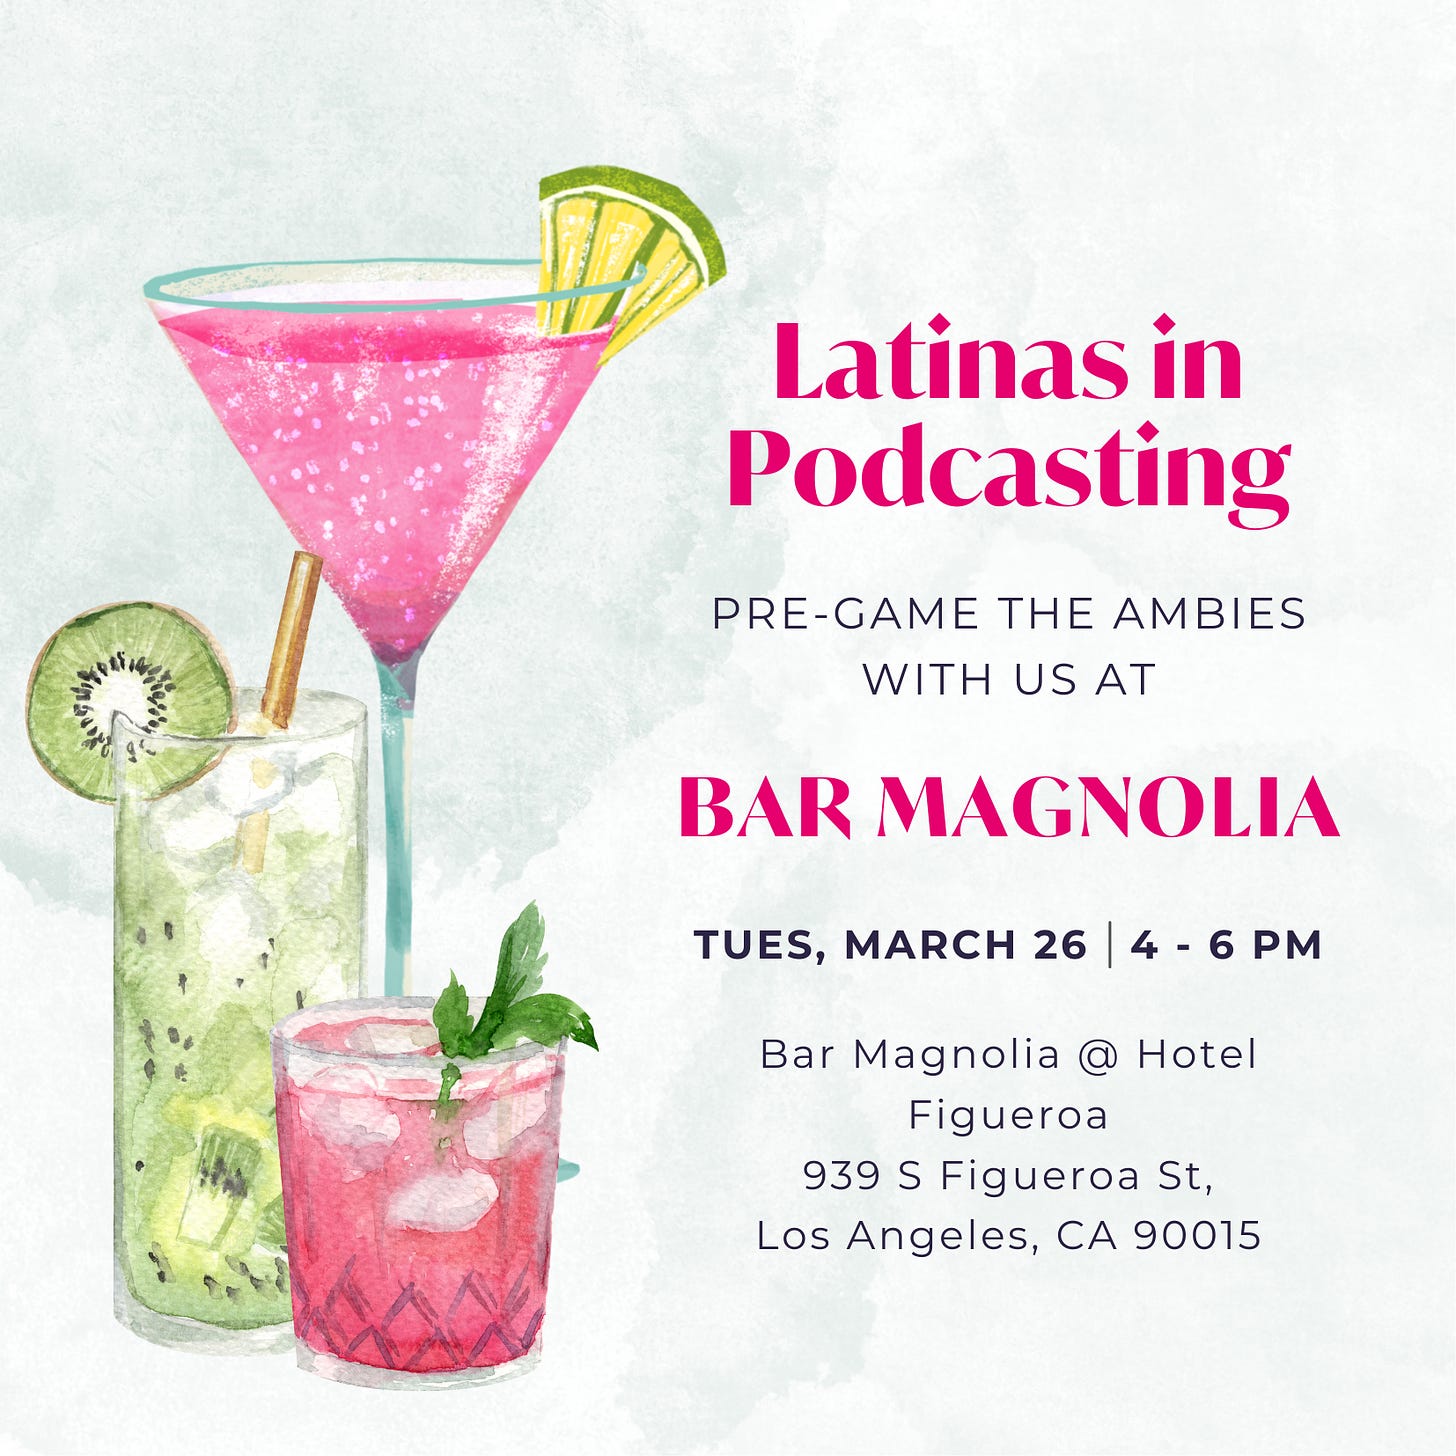 Latinas in Podcasting details with watercolor style cocktails as decor